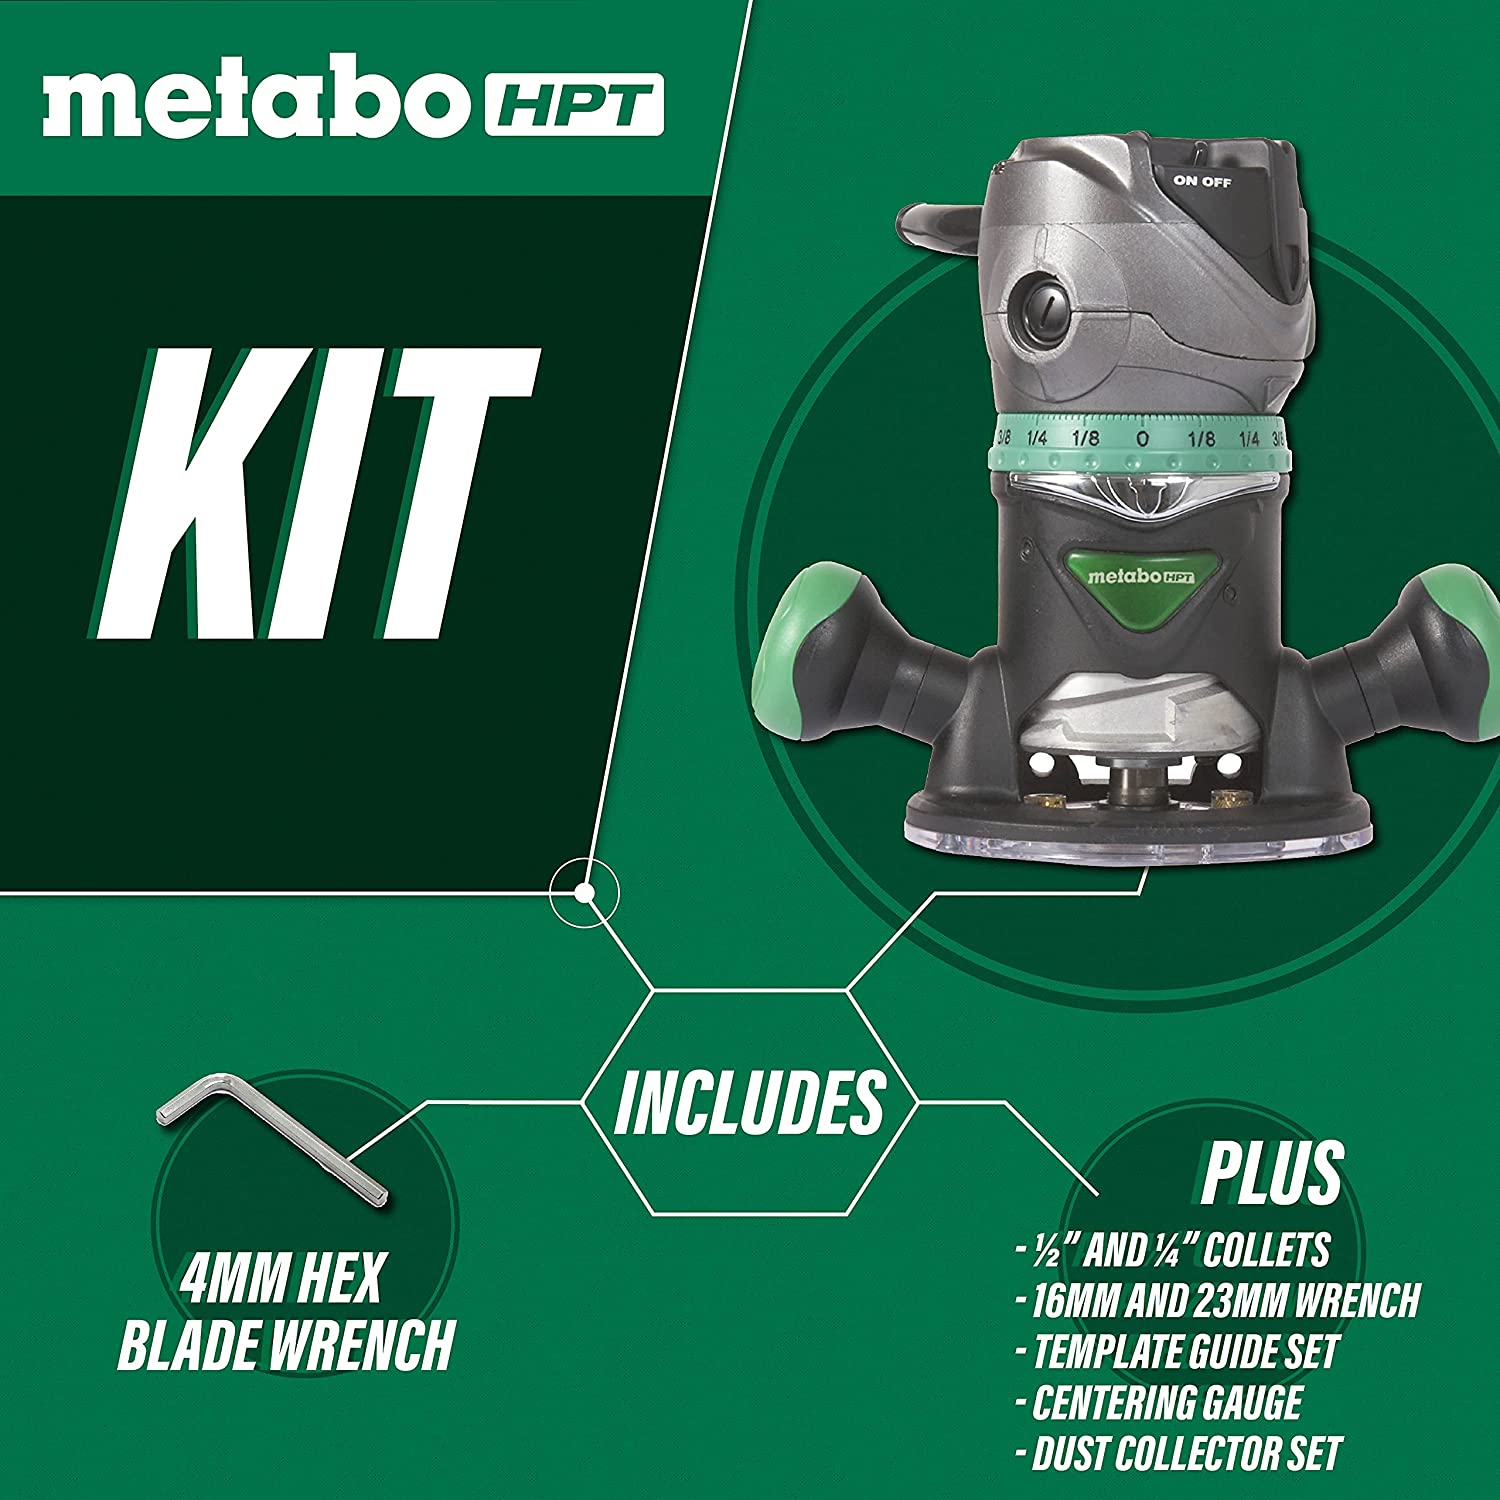 Metabo M12VC HPT Corded Router $69 + free s/h at Amazon